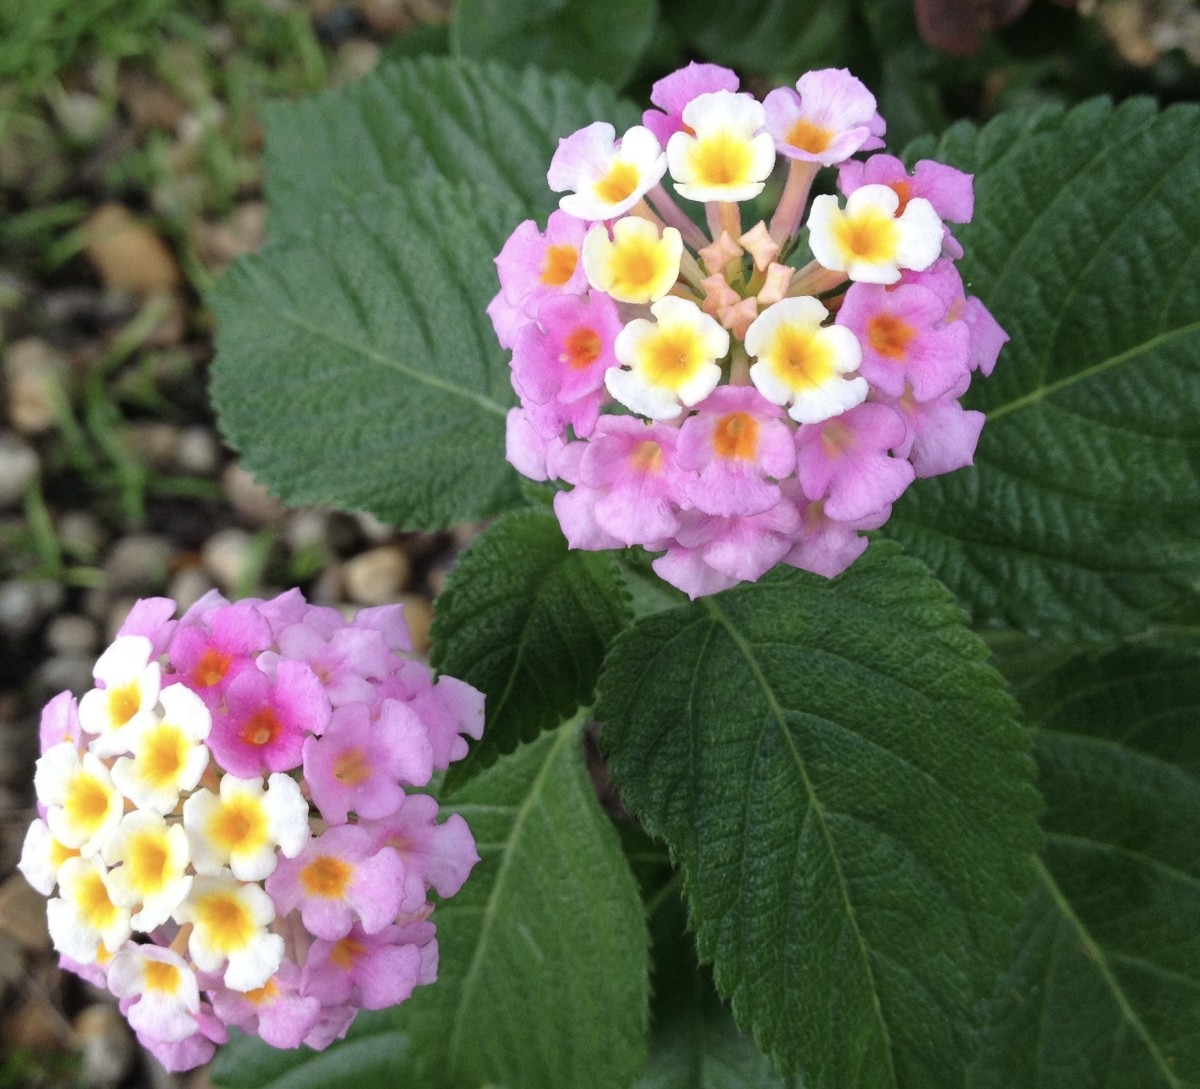 Wild, non-native, and highly invasive lantana popped up in my cousin’s yard in central Florida (Zone 9a). She sent me this photo with the question, “This came up in my yard. It’s pretty, but what is it?” (She’s a chemist, not a gardener.)